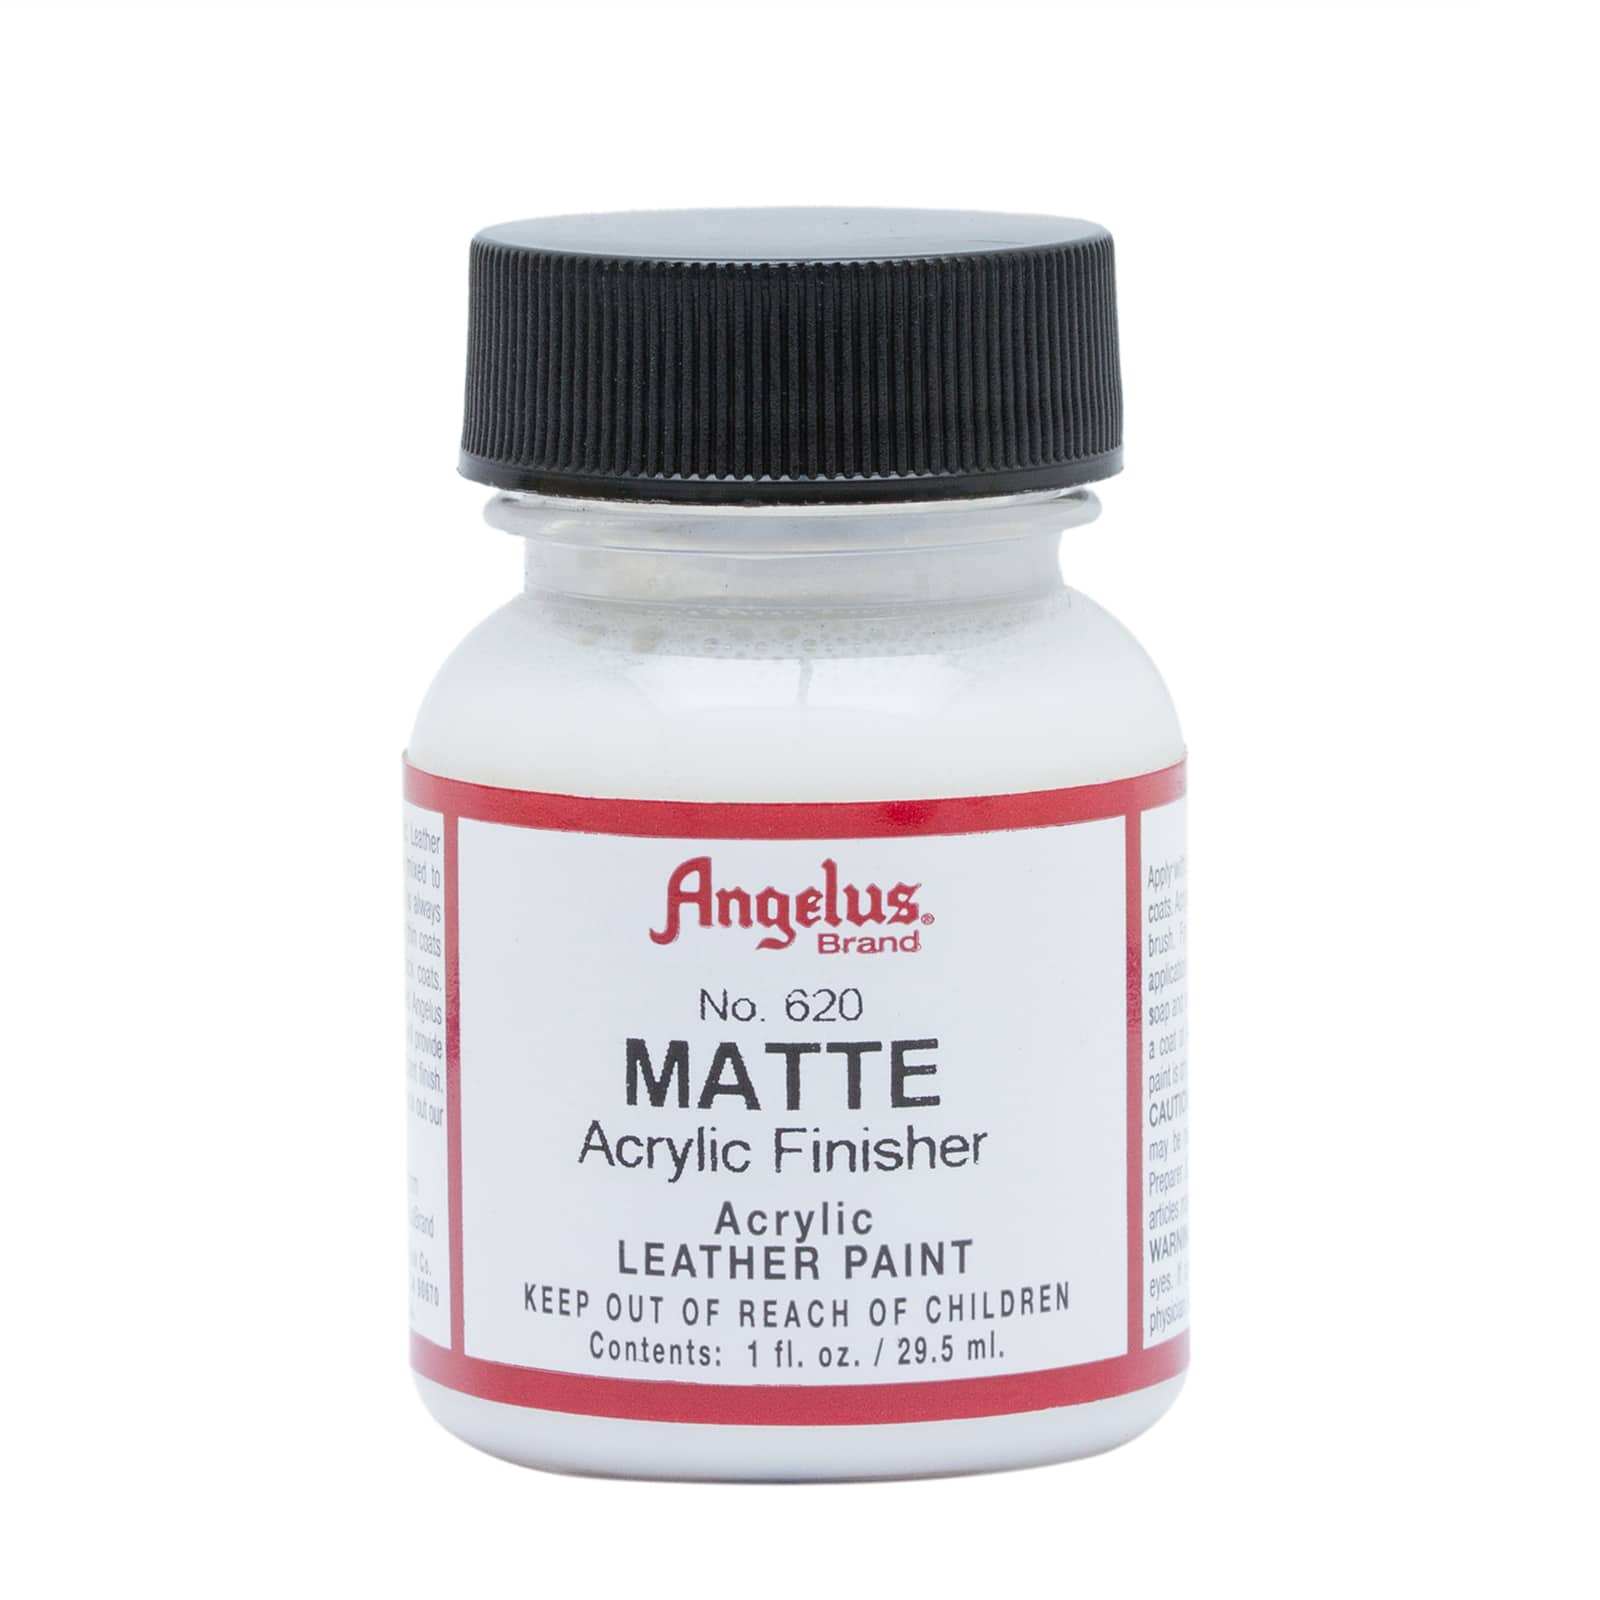 Angelus Brand Acrylic Leather Paint Mate Finisher No. 620 - 4oz, House  Paint -  Canada